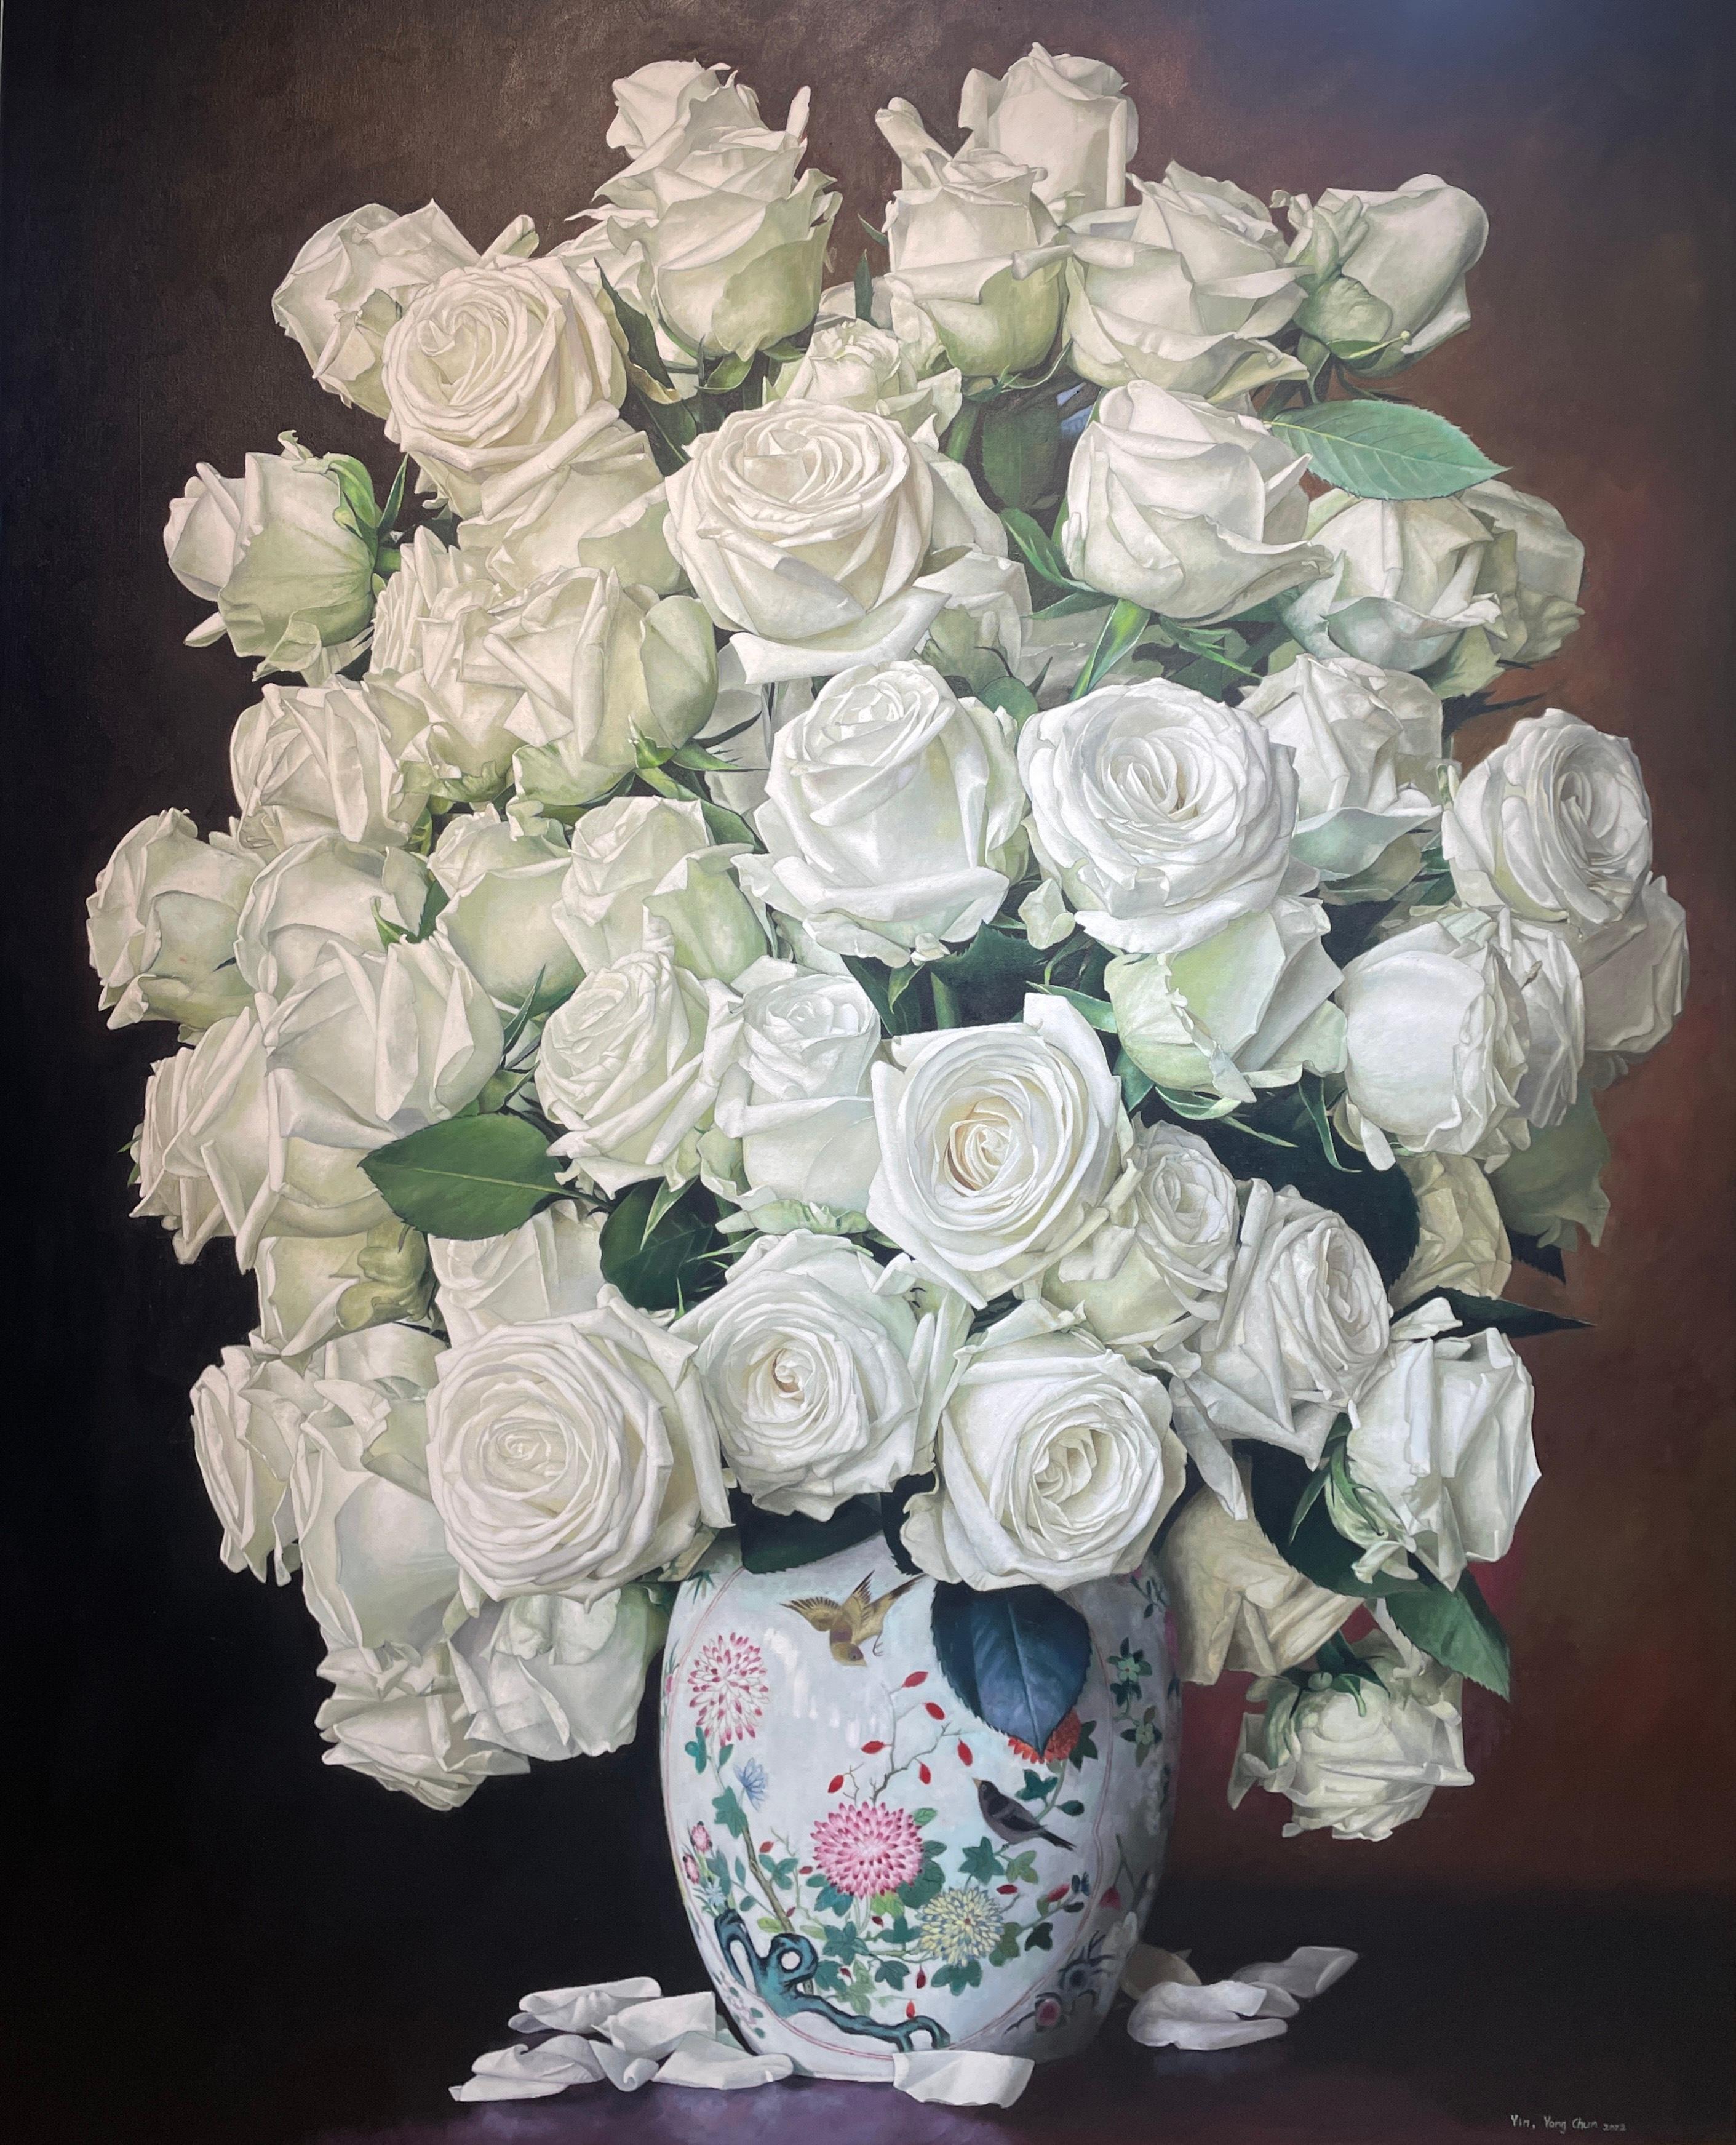 This floral still life, "White Roses with China Pot", by artist Yin Yong Chun is a 60x48 oil painting on canvas featuring a bouquet of white roses in an ornate floral porcelain vase with fallen white petals on the table. A dark moody background